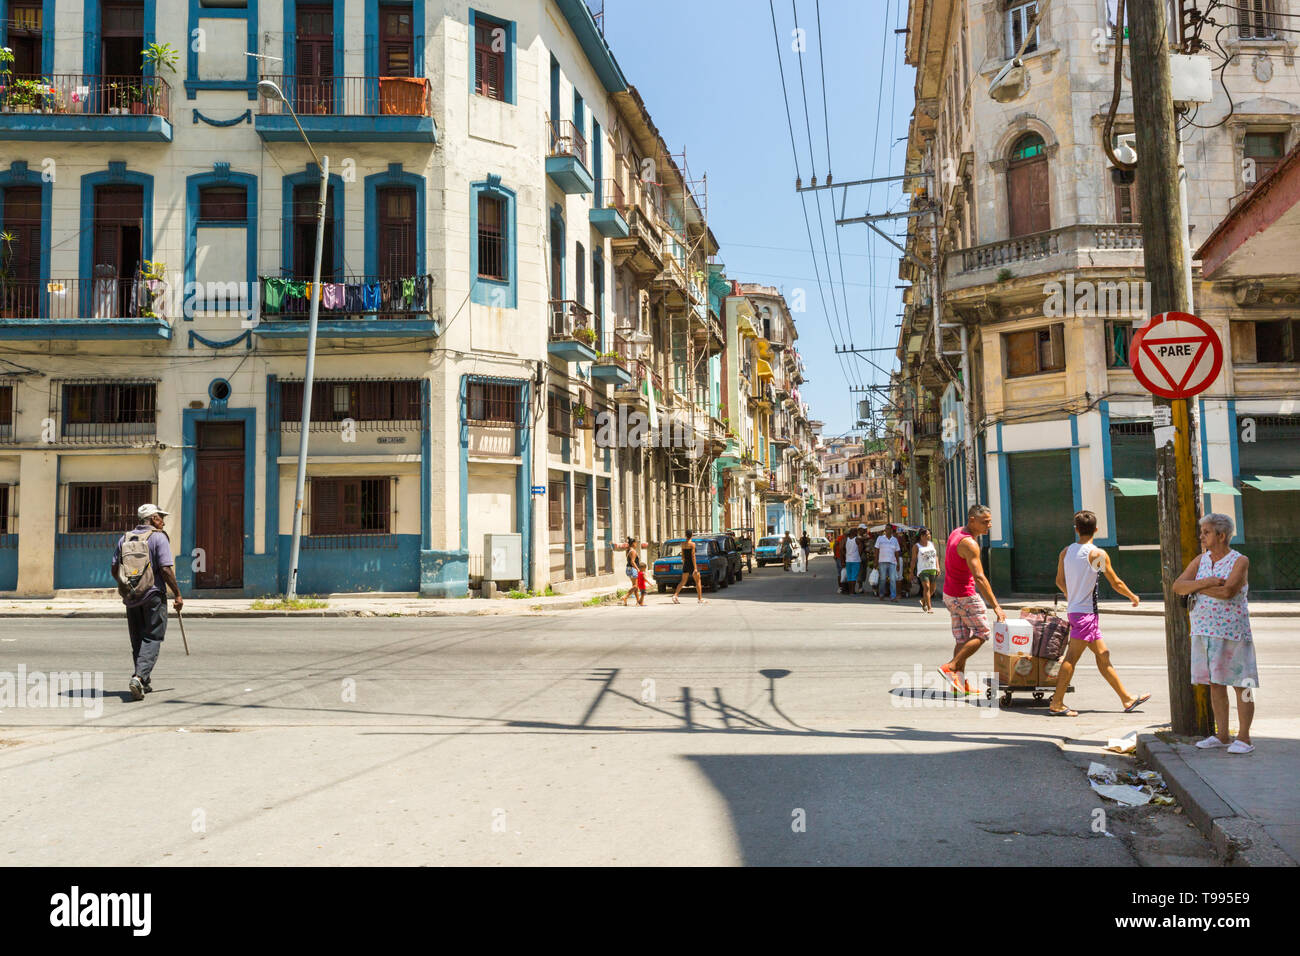 Typical street scene and local people in the Centro district of Havana, Cuba Stock Photo